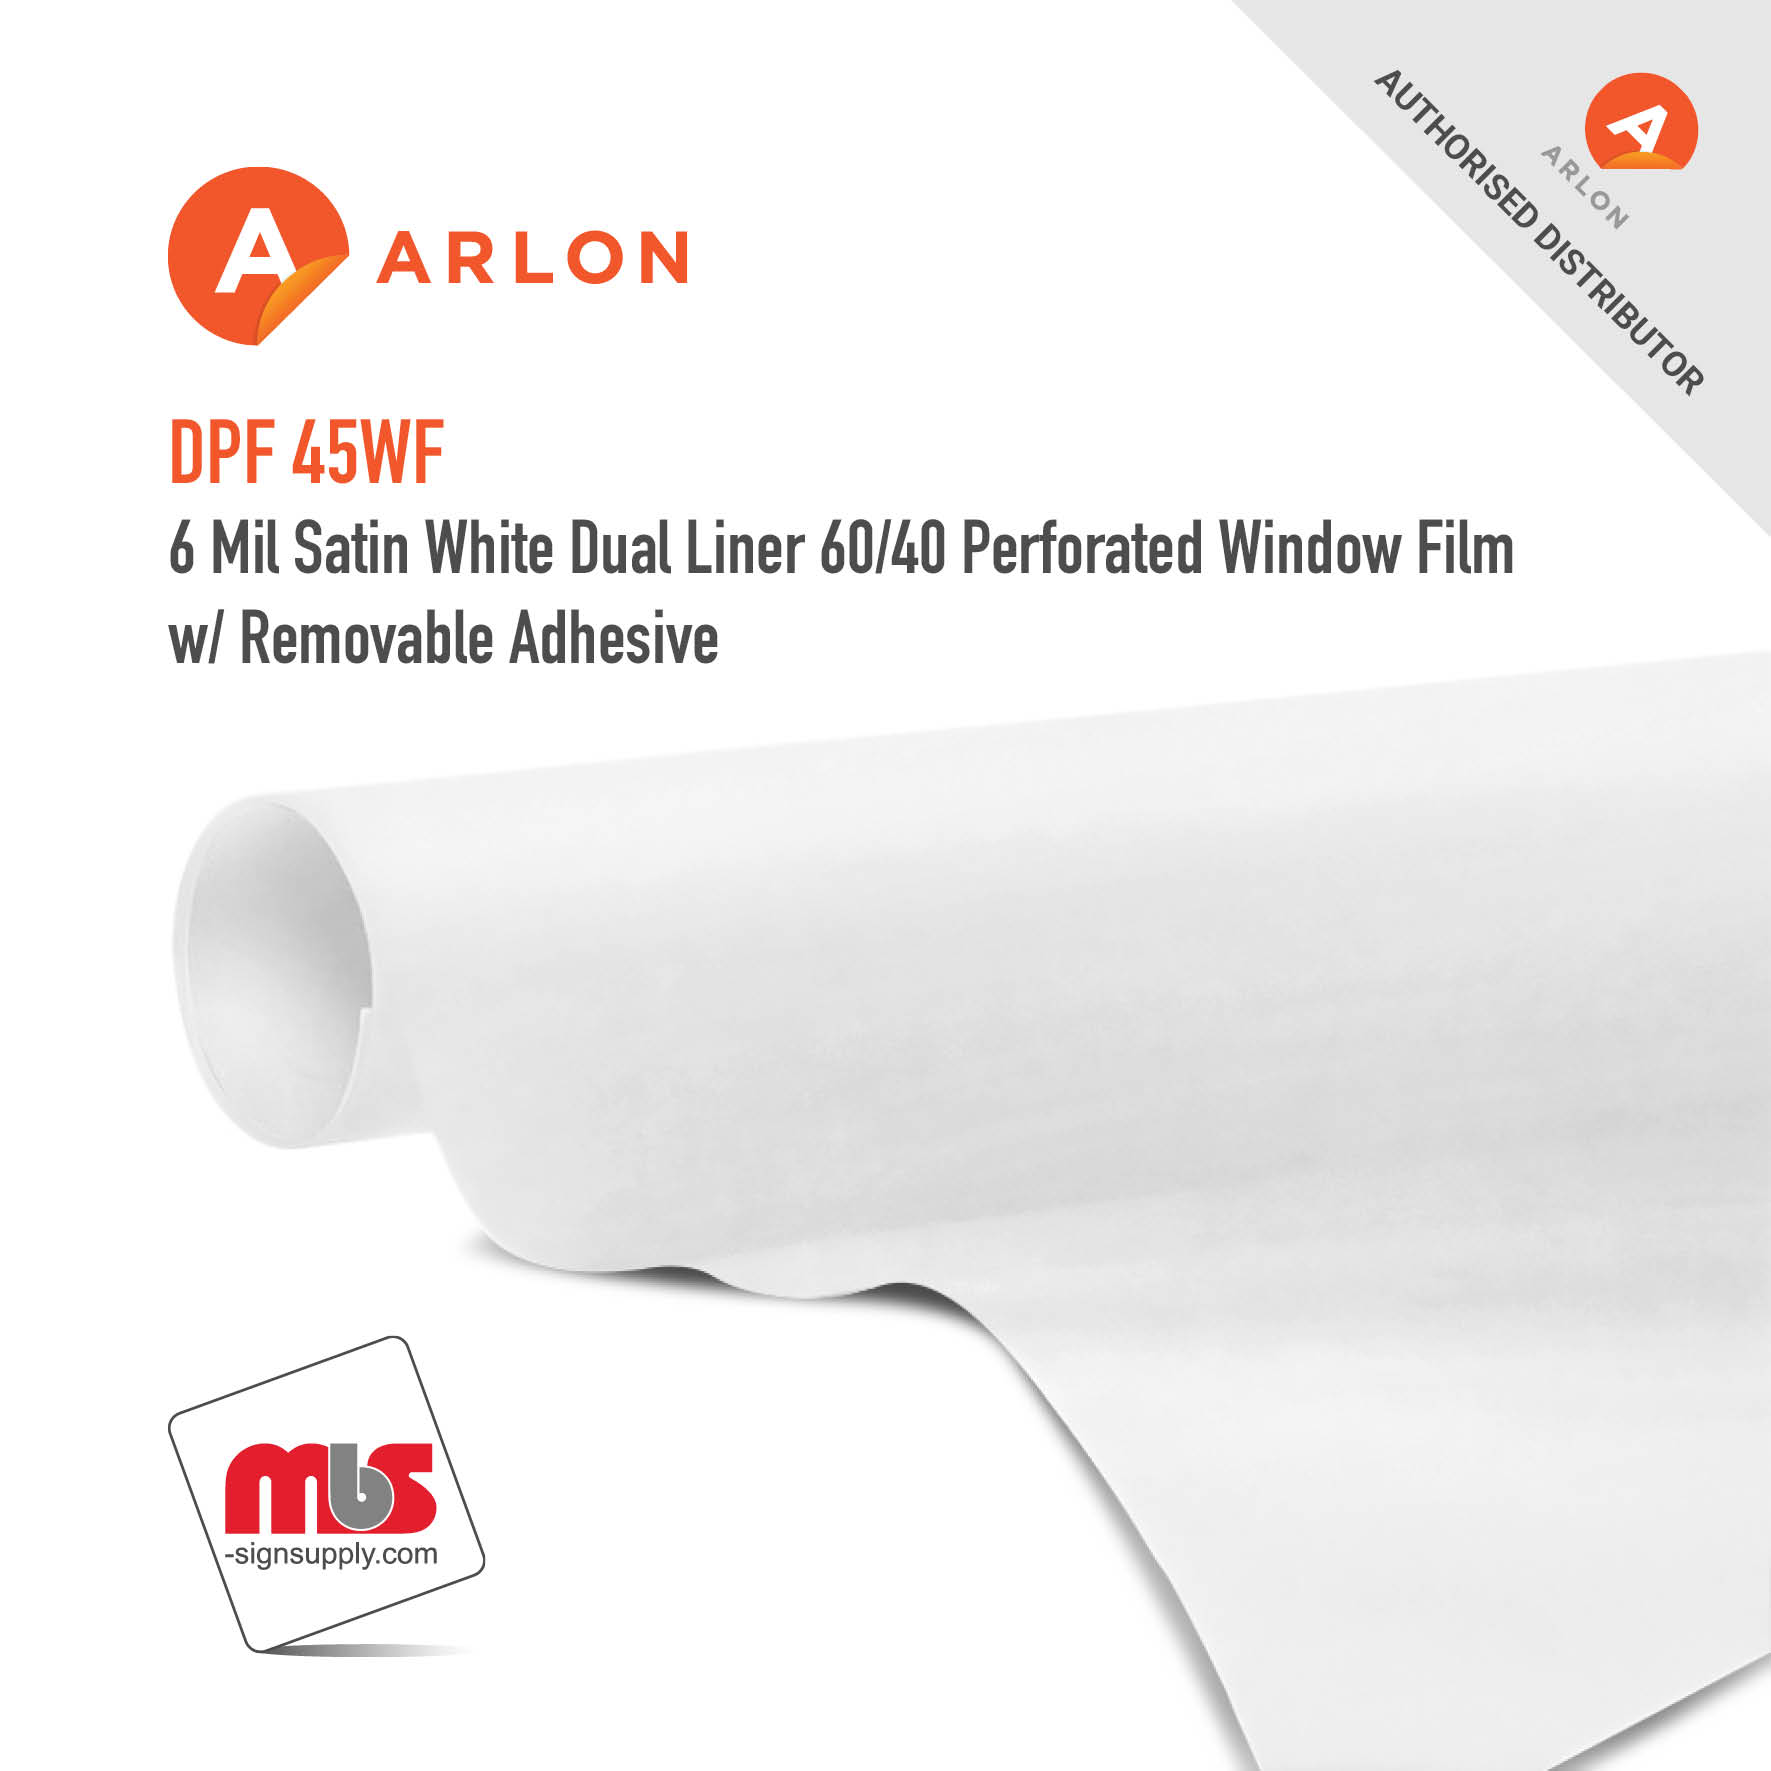 60'' X 54 Yard Roll - Arlon DPF 47WF 6 Mil Satin White Dual Liner 60/40 Perforated Window Film w/ Removable Adhesive